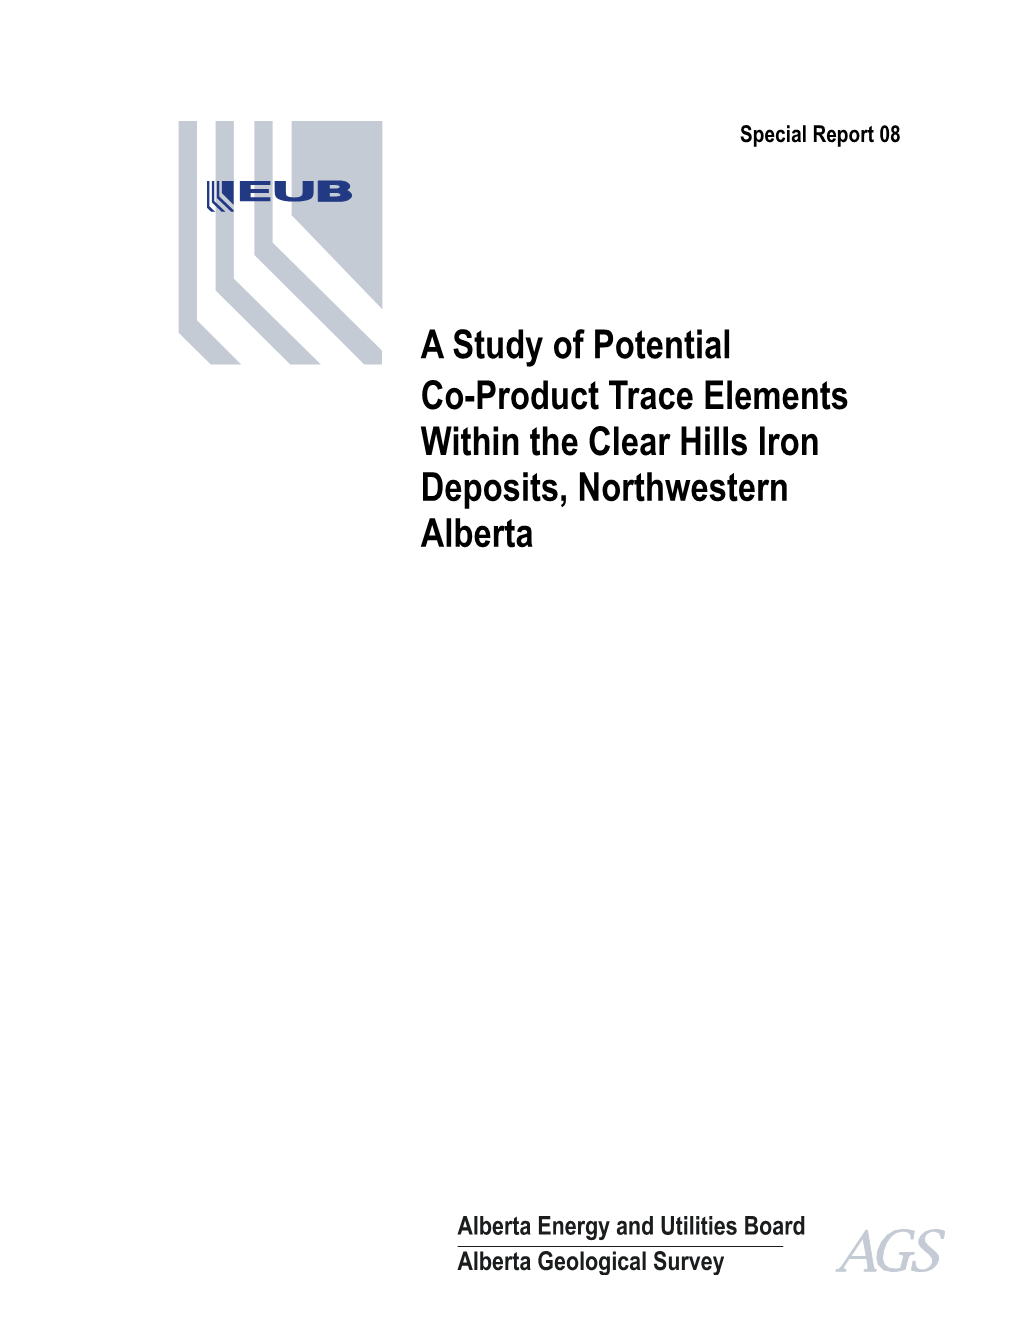 A Study of Potential Co-Product Trace Elements Within the Clear Hills Iron Deposits, Northwestern Alberta